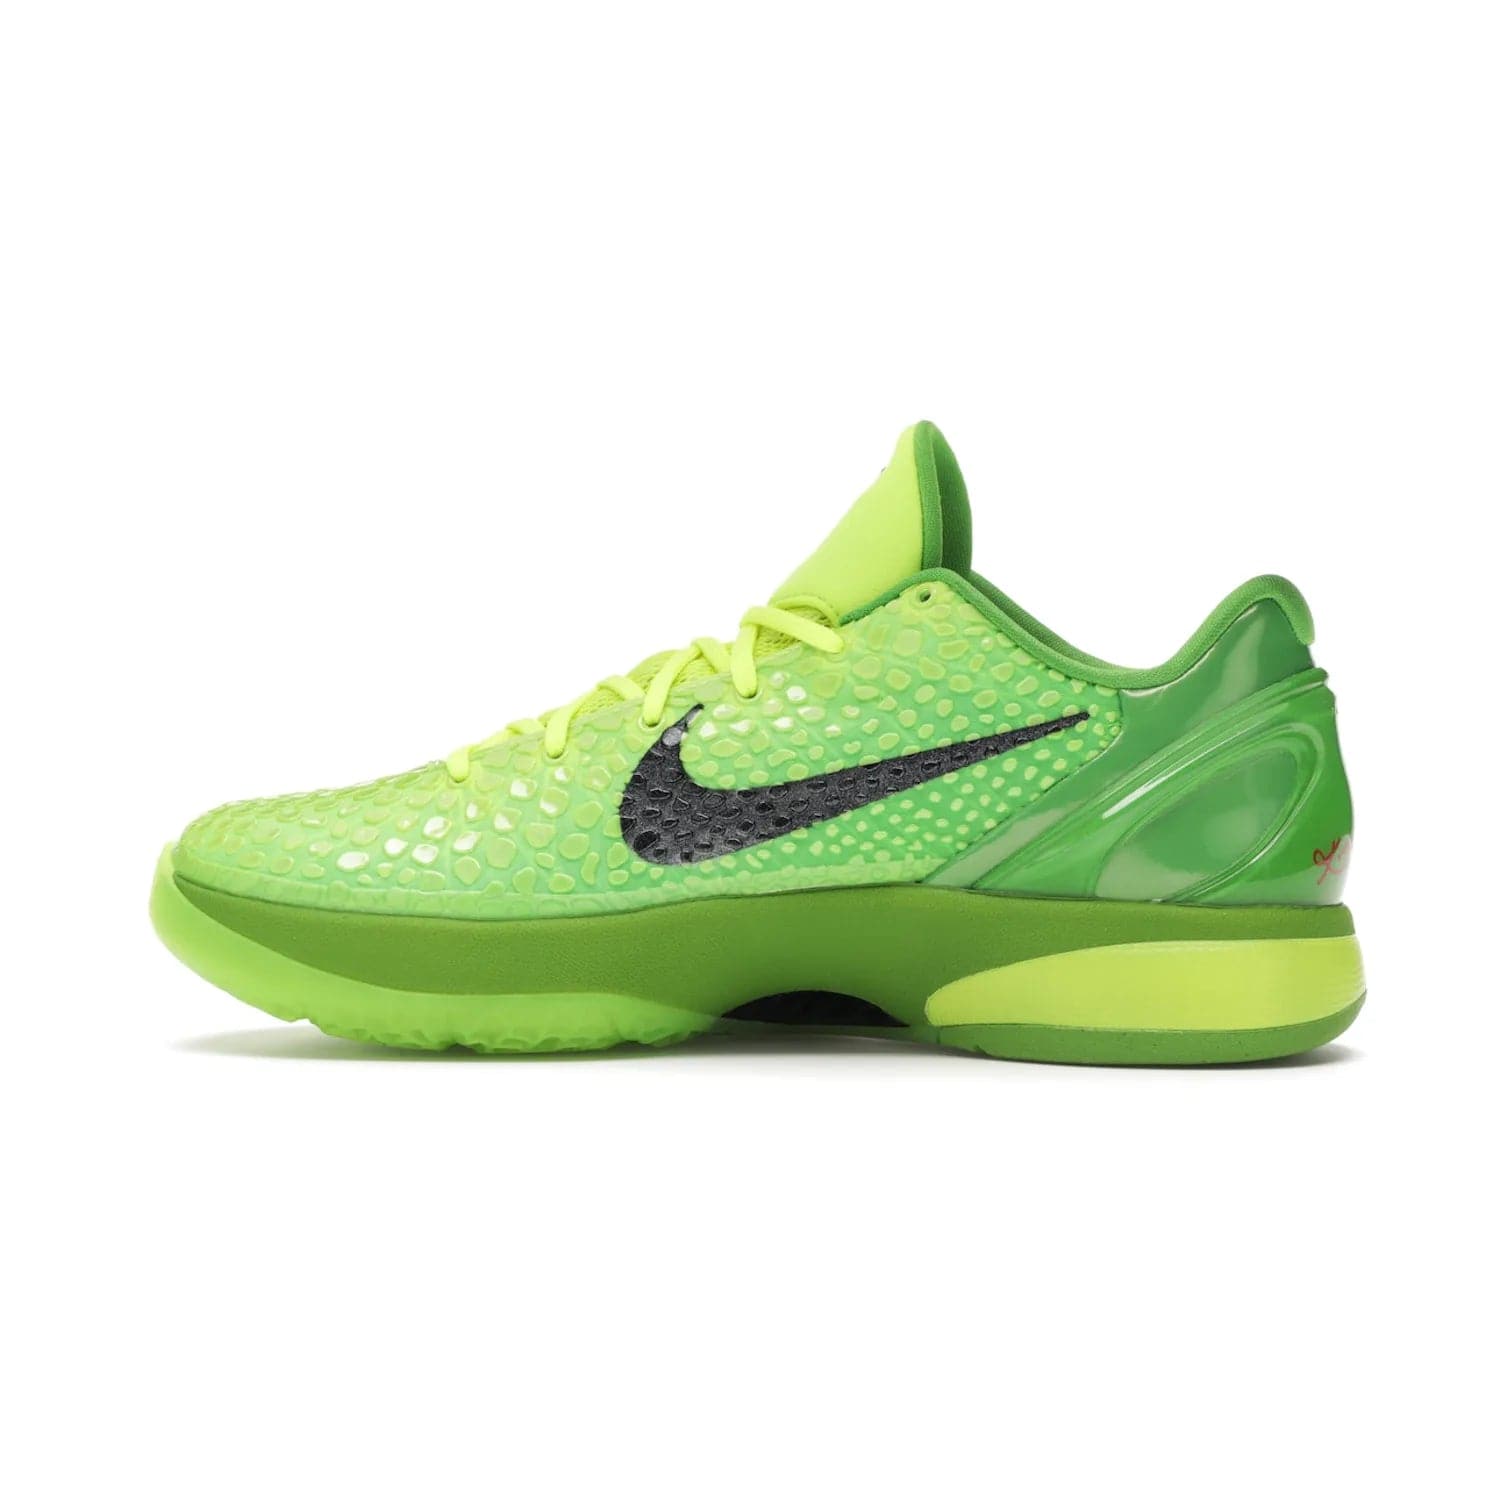 Nike Kobe 6 Protro Grinch (2020) - Image 20 - Only at www.BallersClubKickz.com - #
The Nike Kobe 6 Protro Grinch updates the iconic 2011 design with modern tech like a Zoom Air cushioning system, scaled-down traction, and updated silhouette. Experience the textured Green Apple and Volt upper plus bright red and green accents for $180.